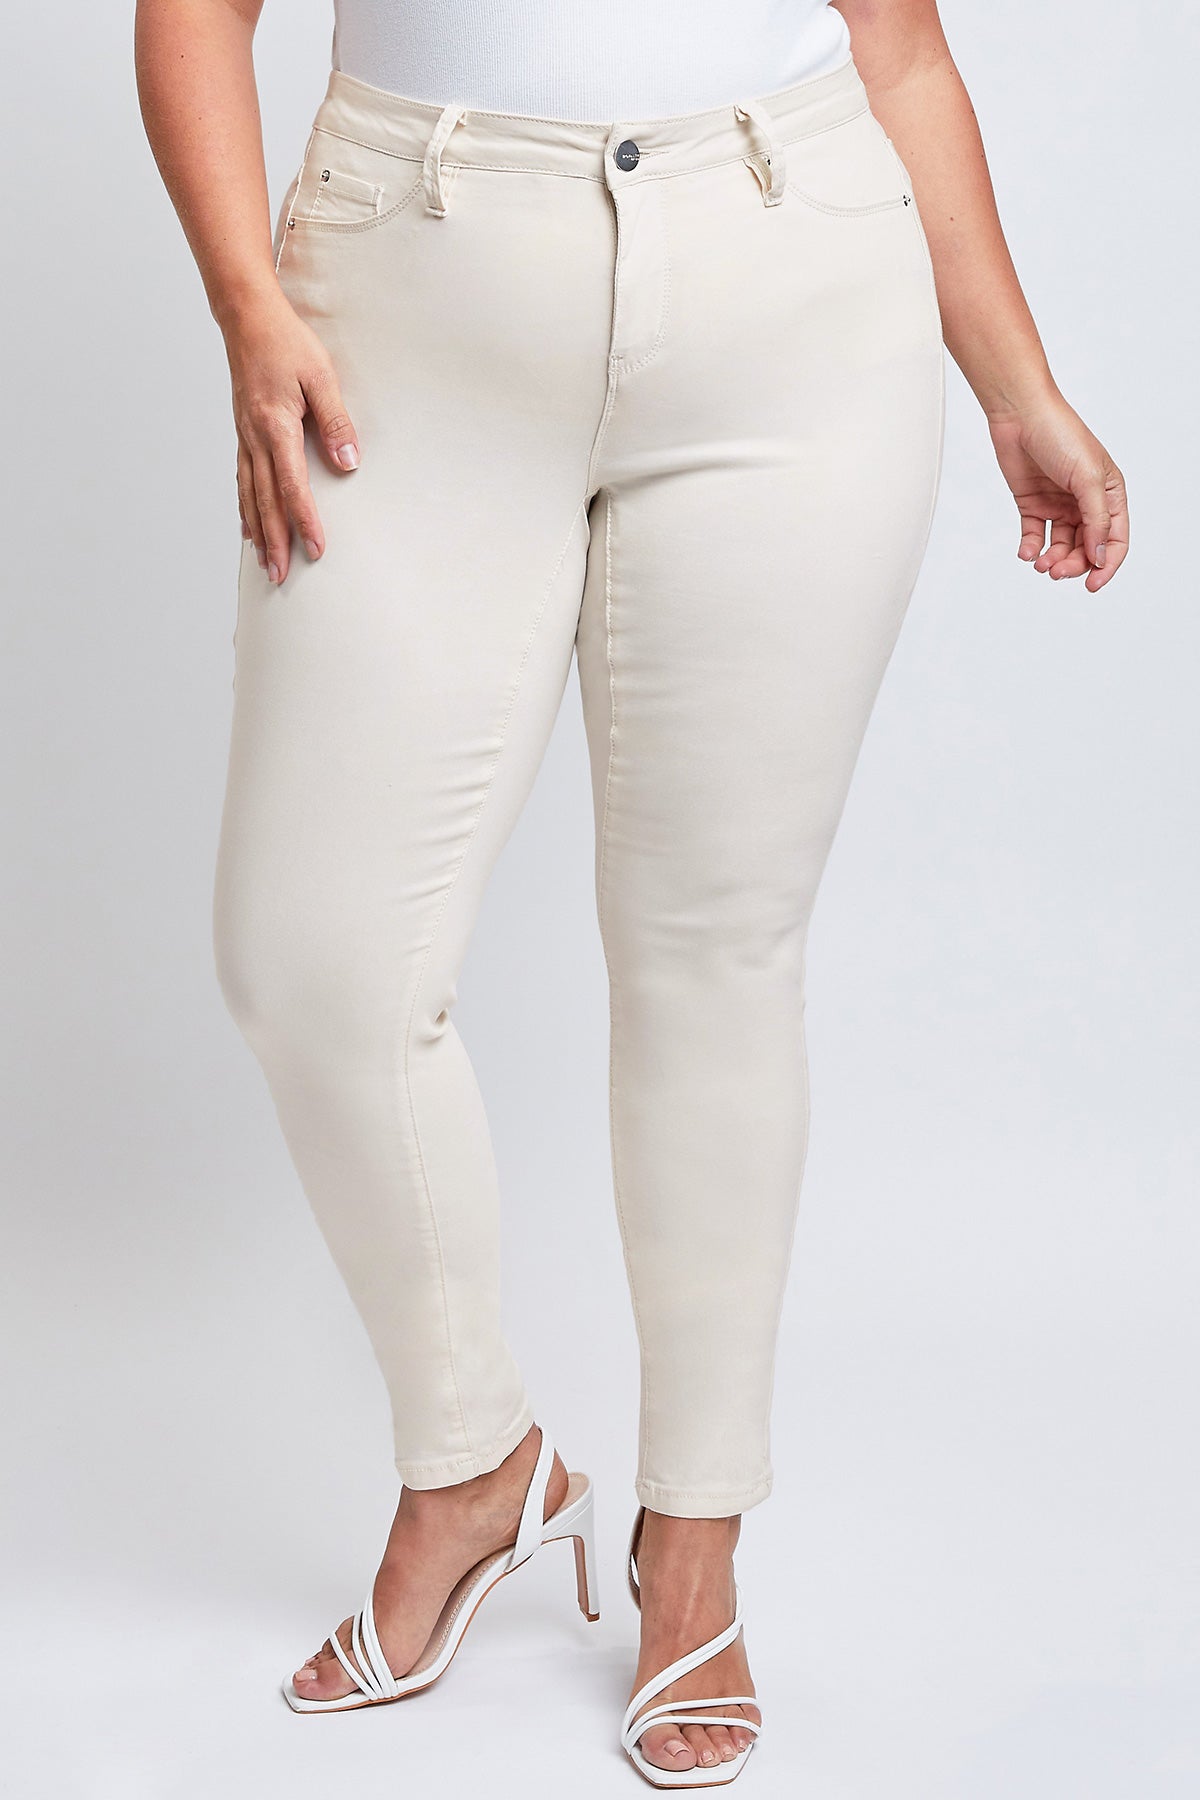 Missy Plus Size Hyperstretch Skinny Jean Pack Of 6